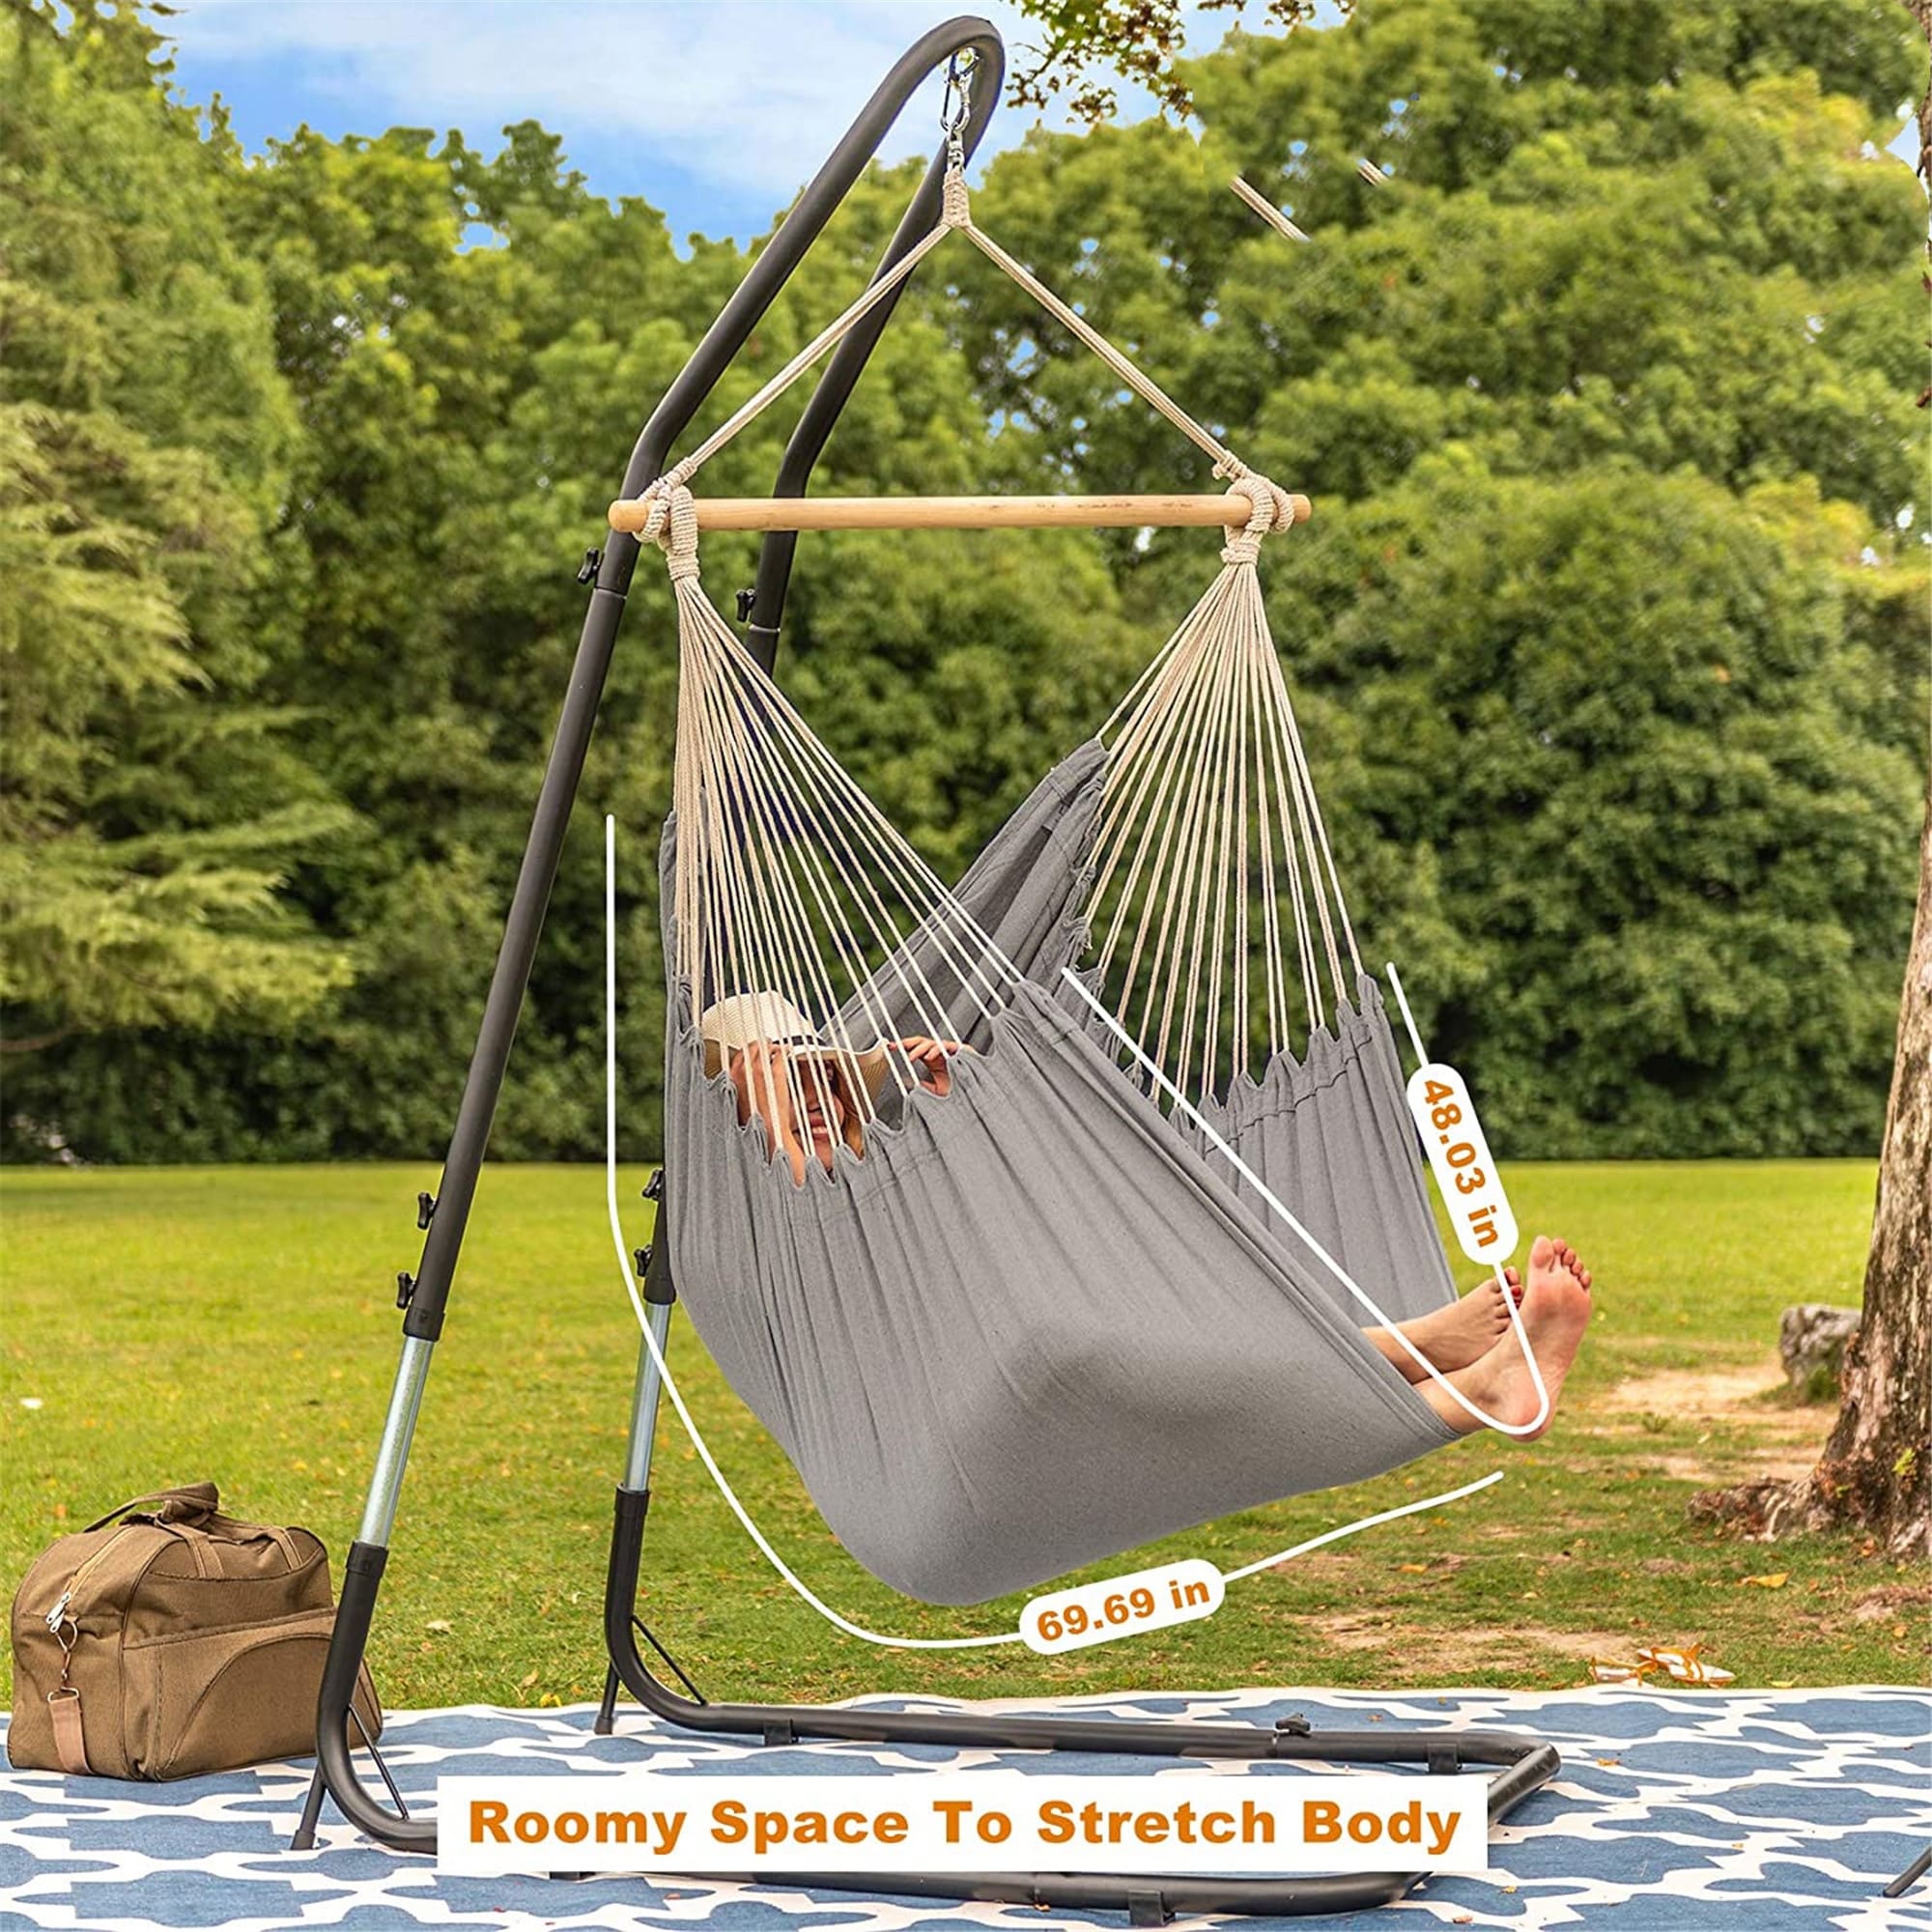 2 Seat Cushions Included with Carrying Bag Quality Cotton Weave Max 330 Lbs Hammock Chair with Hardware Kits for Indoor Outdoor Beige PNAEUT Hammock Chair Hanging Rope Swing 